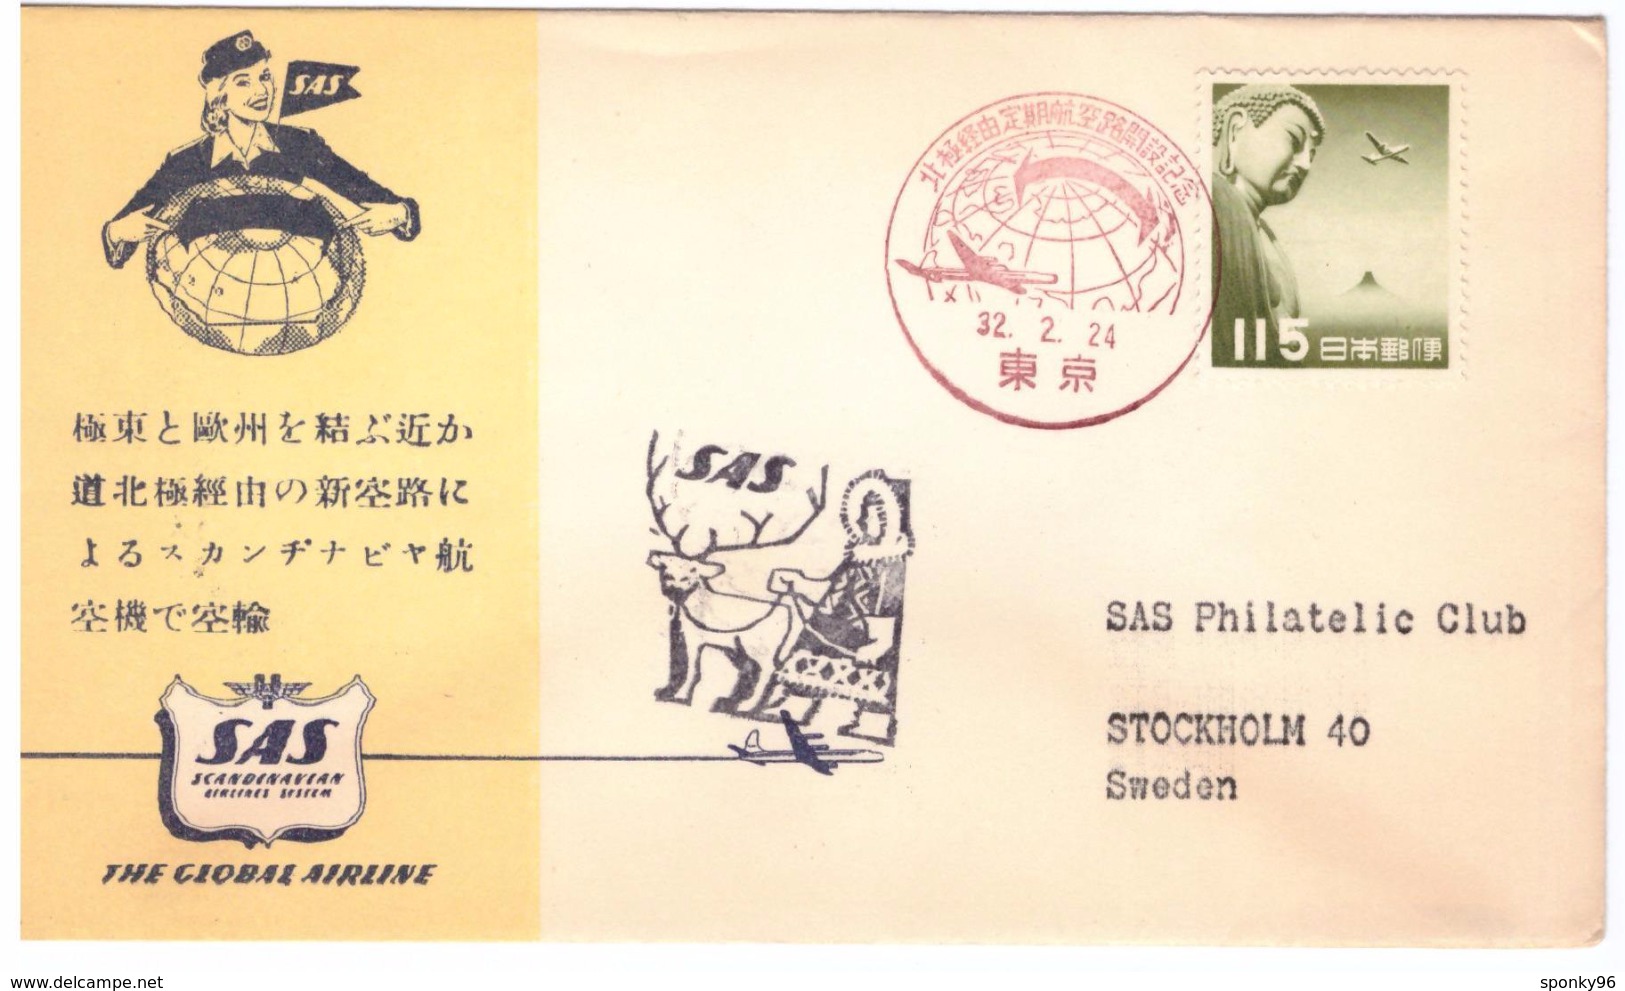 STORIA POSTALE - GIAPPONE - JAPAN - ANNO 1957 - TOKIO - FILATELISTIKLUBB - FLOWN OVER THE PEOPLE- STOCHOLM - SWEDEN - - Lettres & Documents